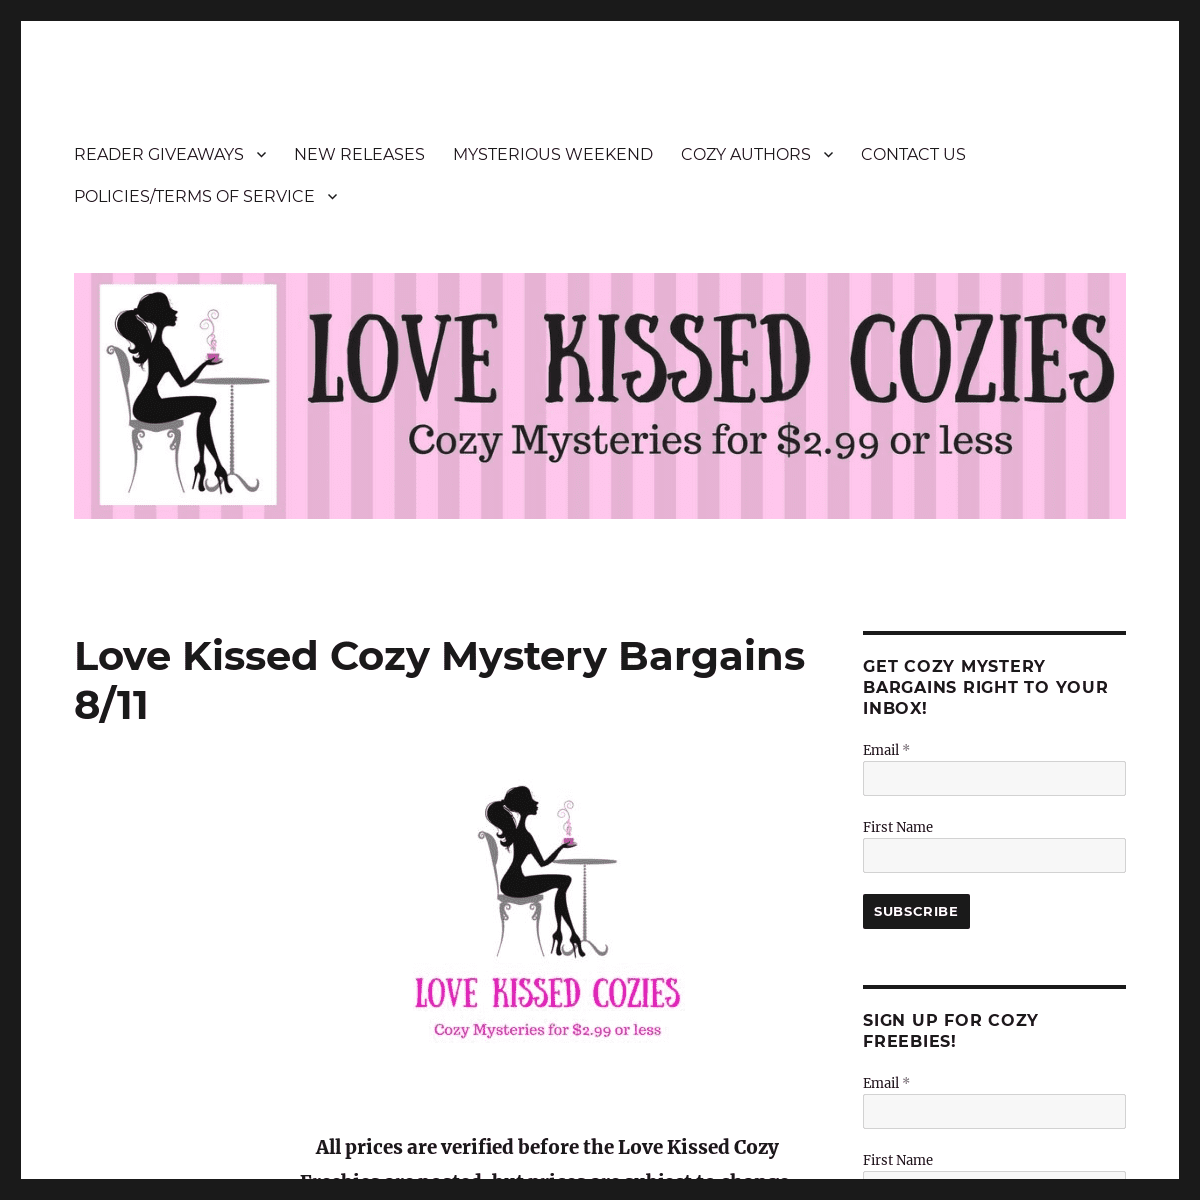 Love Kissed Cozies | Cozy Mysteries for $2.99 or less